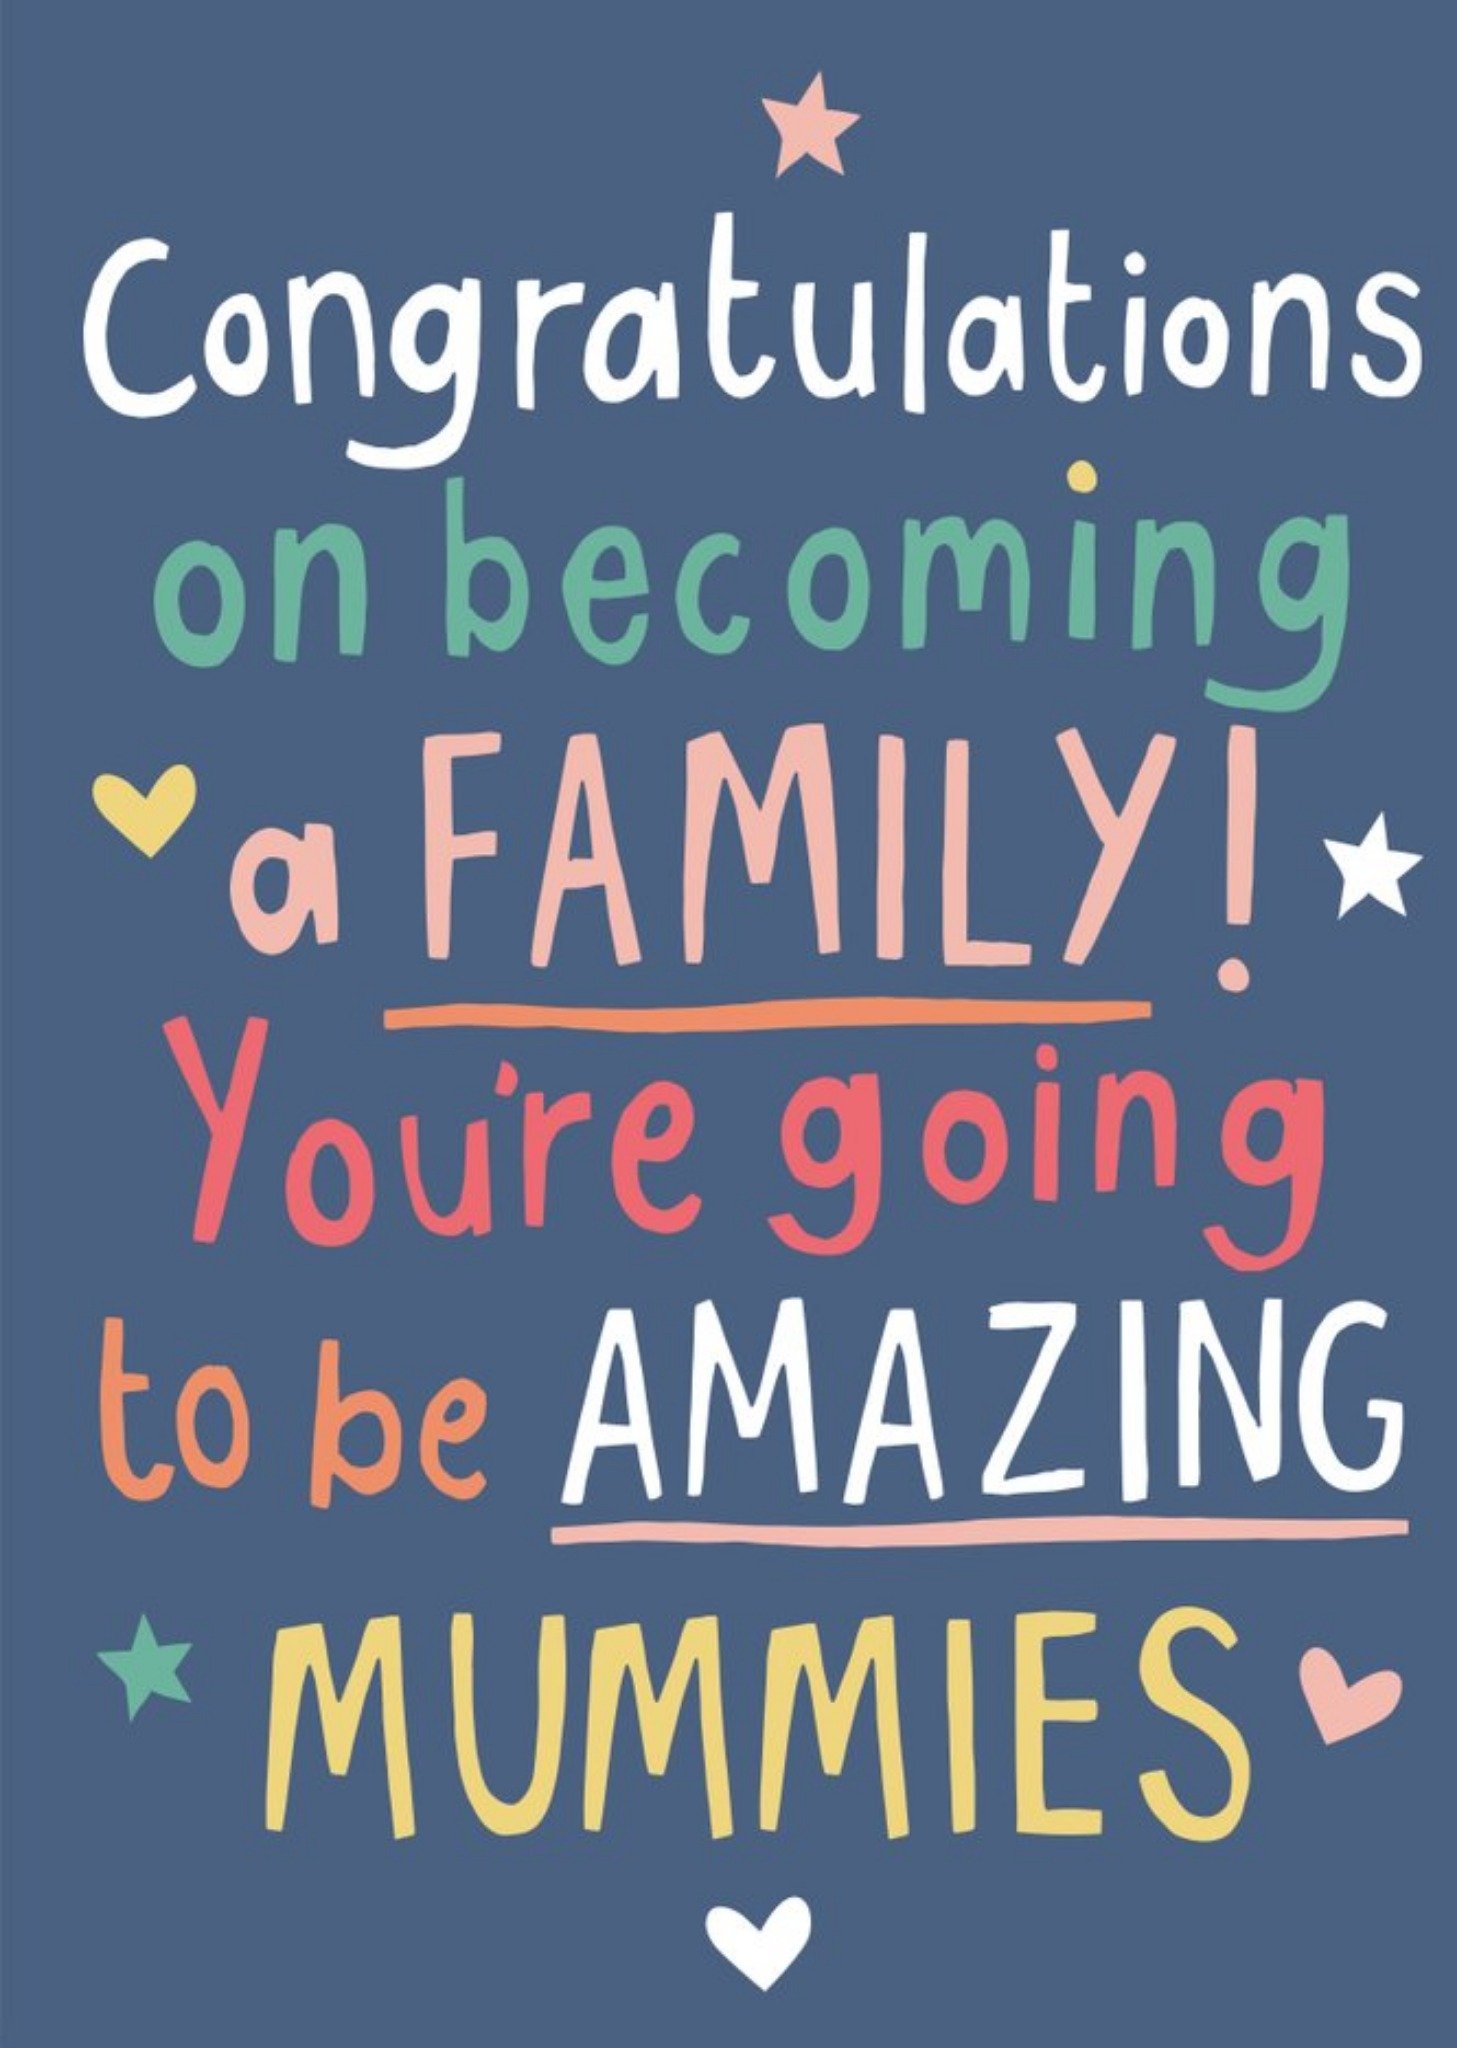 Moonpig Typographic Congratulations On Becoming A Family Youre Going To Be Amazing Mummies Card, Lar